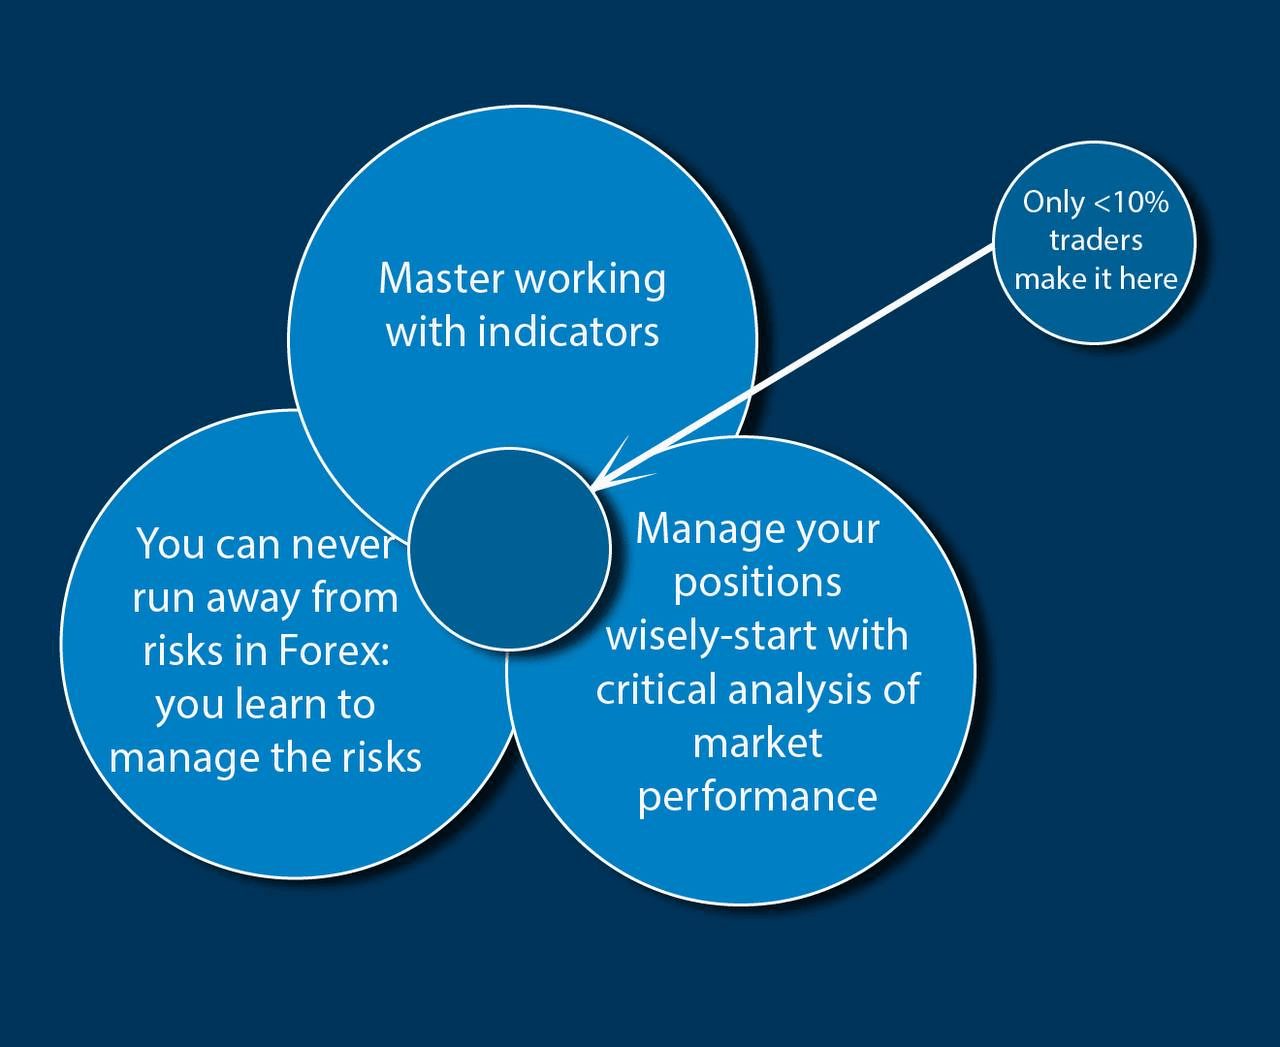 What is risk management?